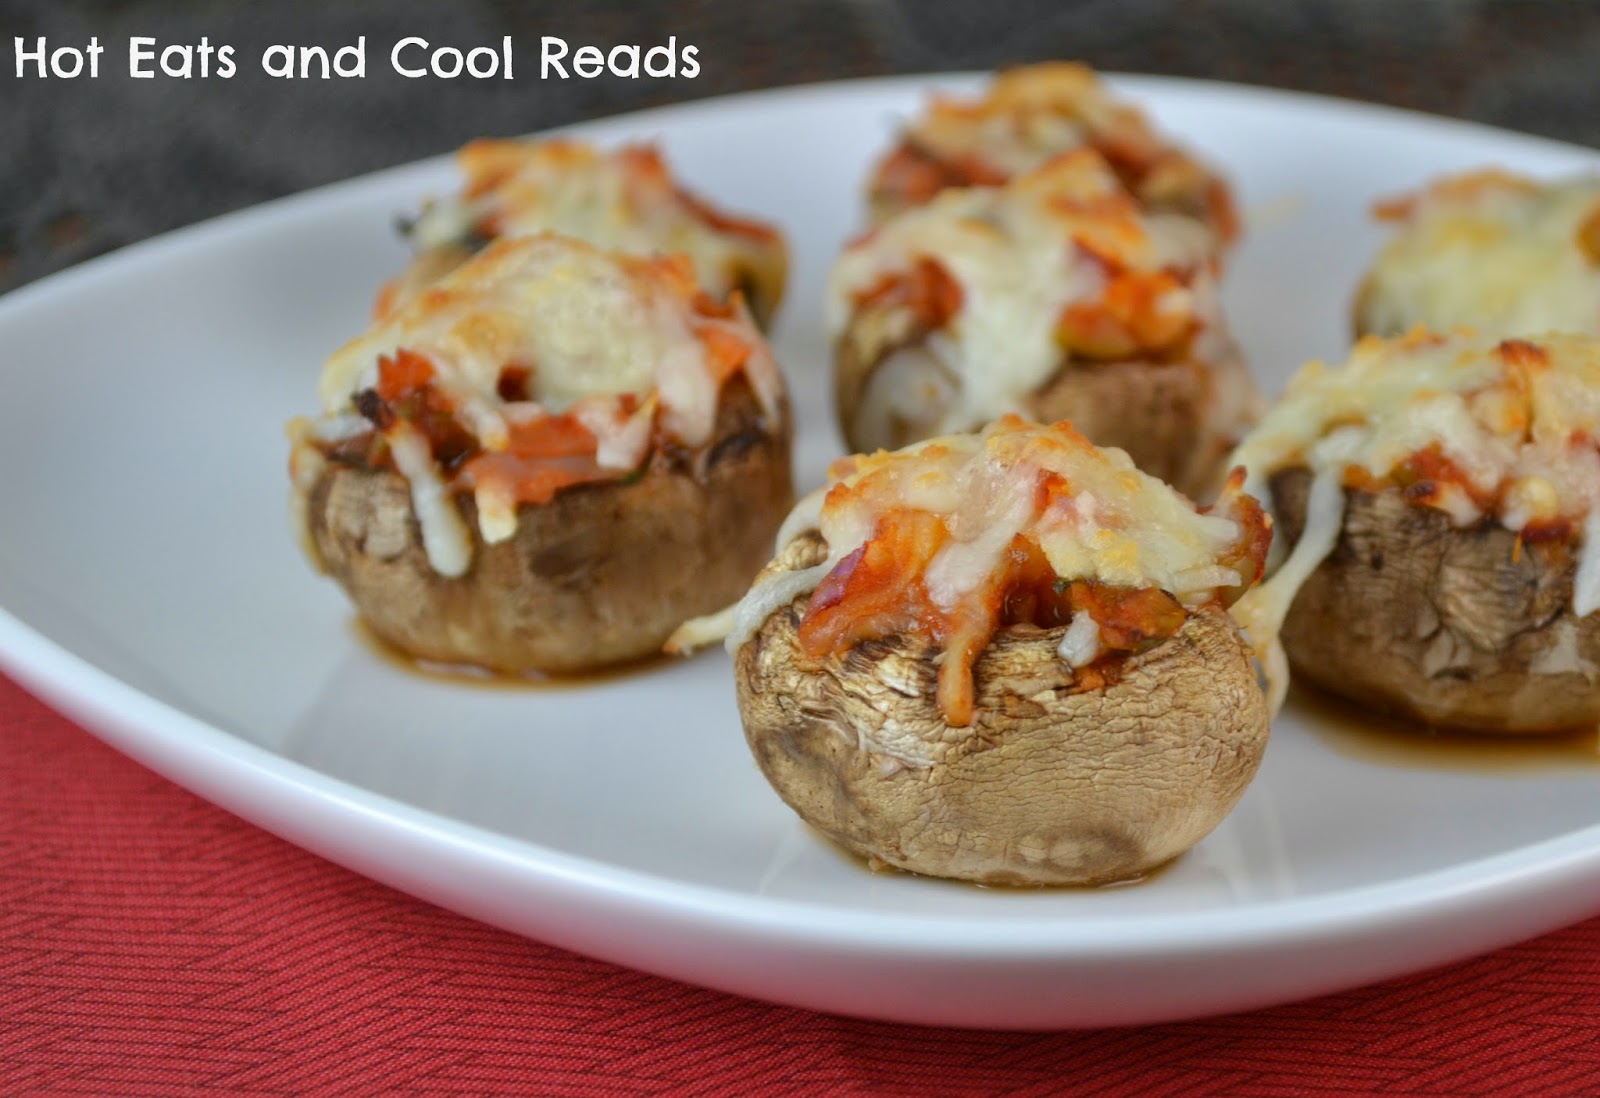 This recipe is sure to please any pizza or mushroom lover. You can have a great appetizer in less than 30 minutes! Pizza Stuffed Mushrooms from Hot Eats and Cool Reads!